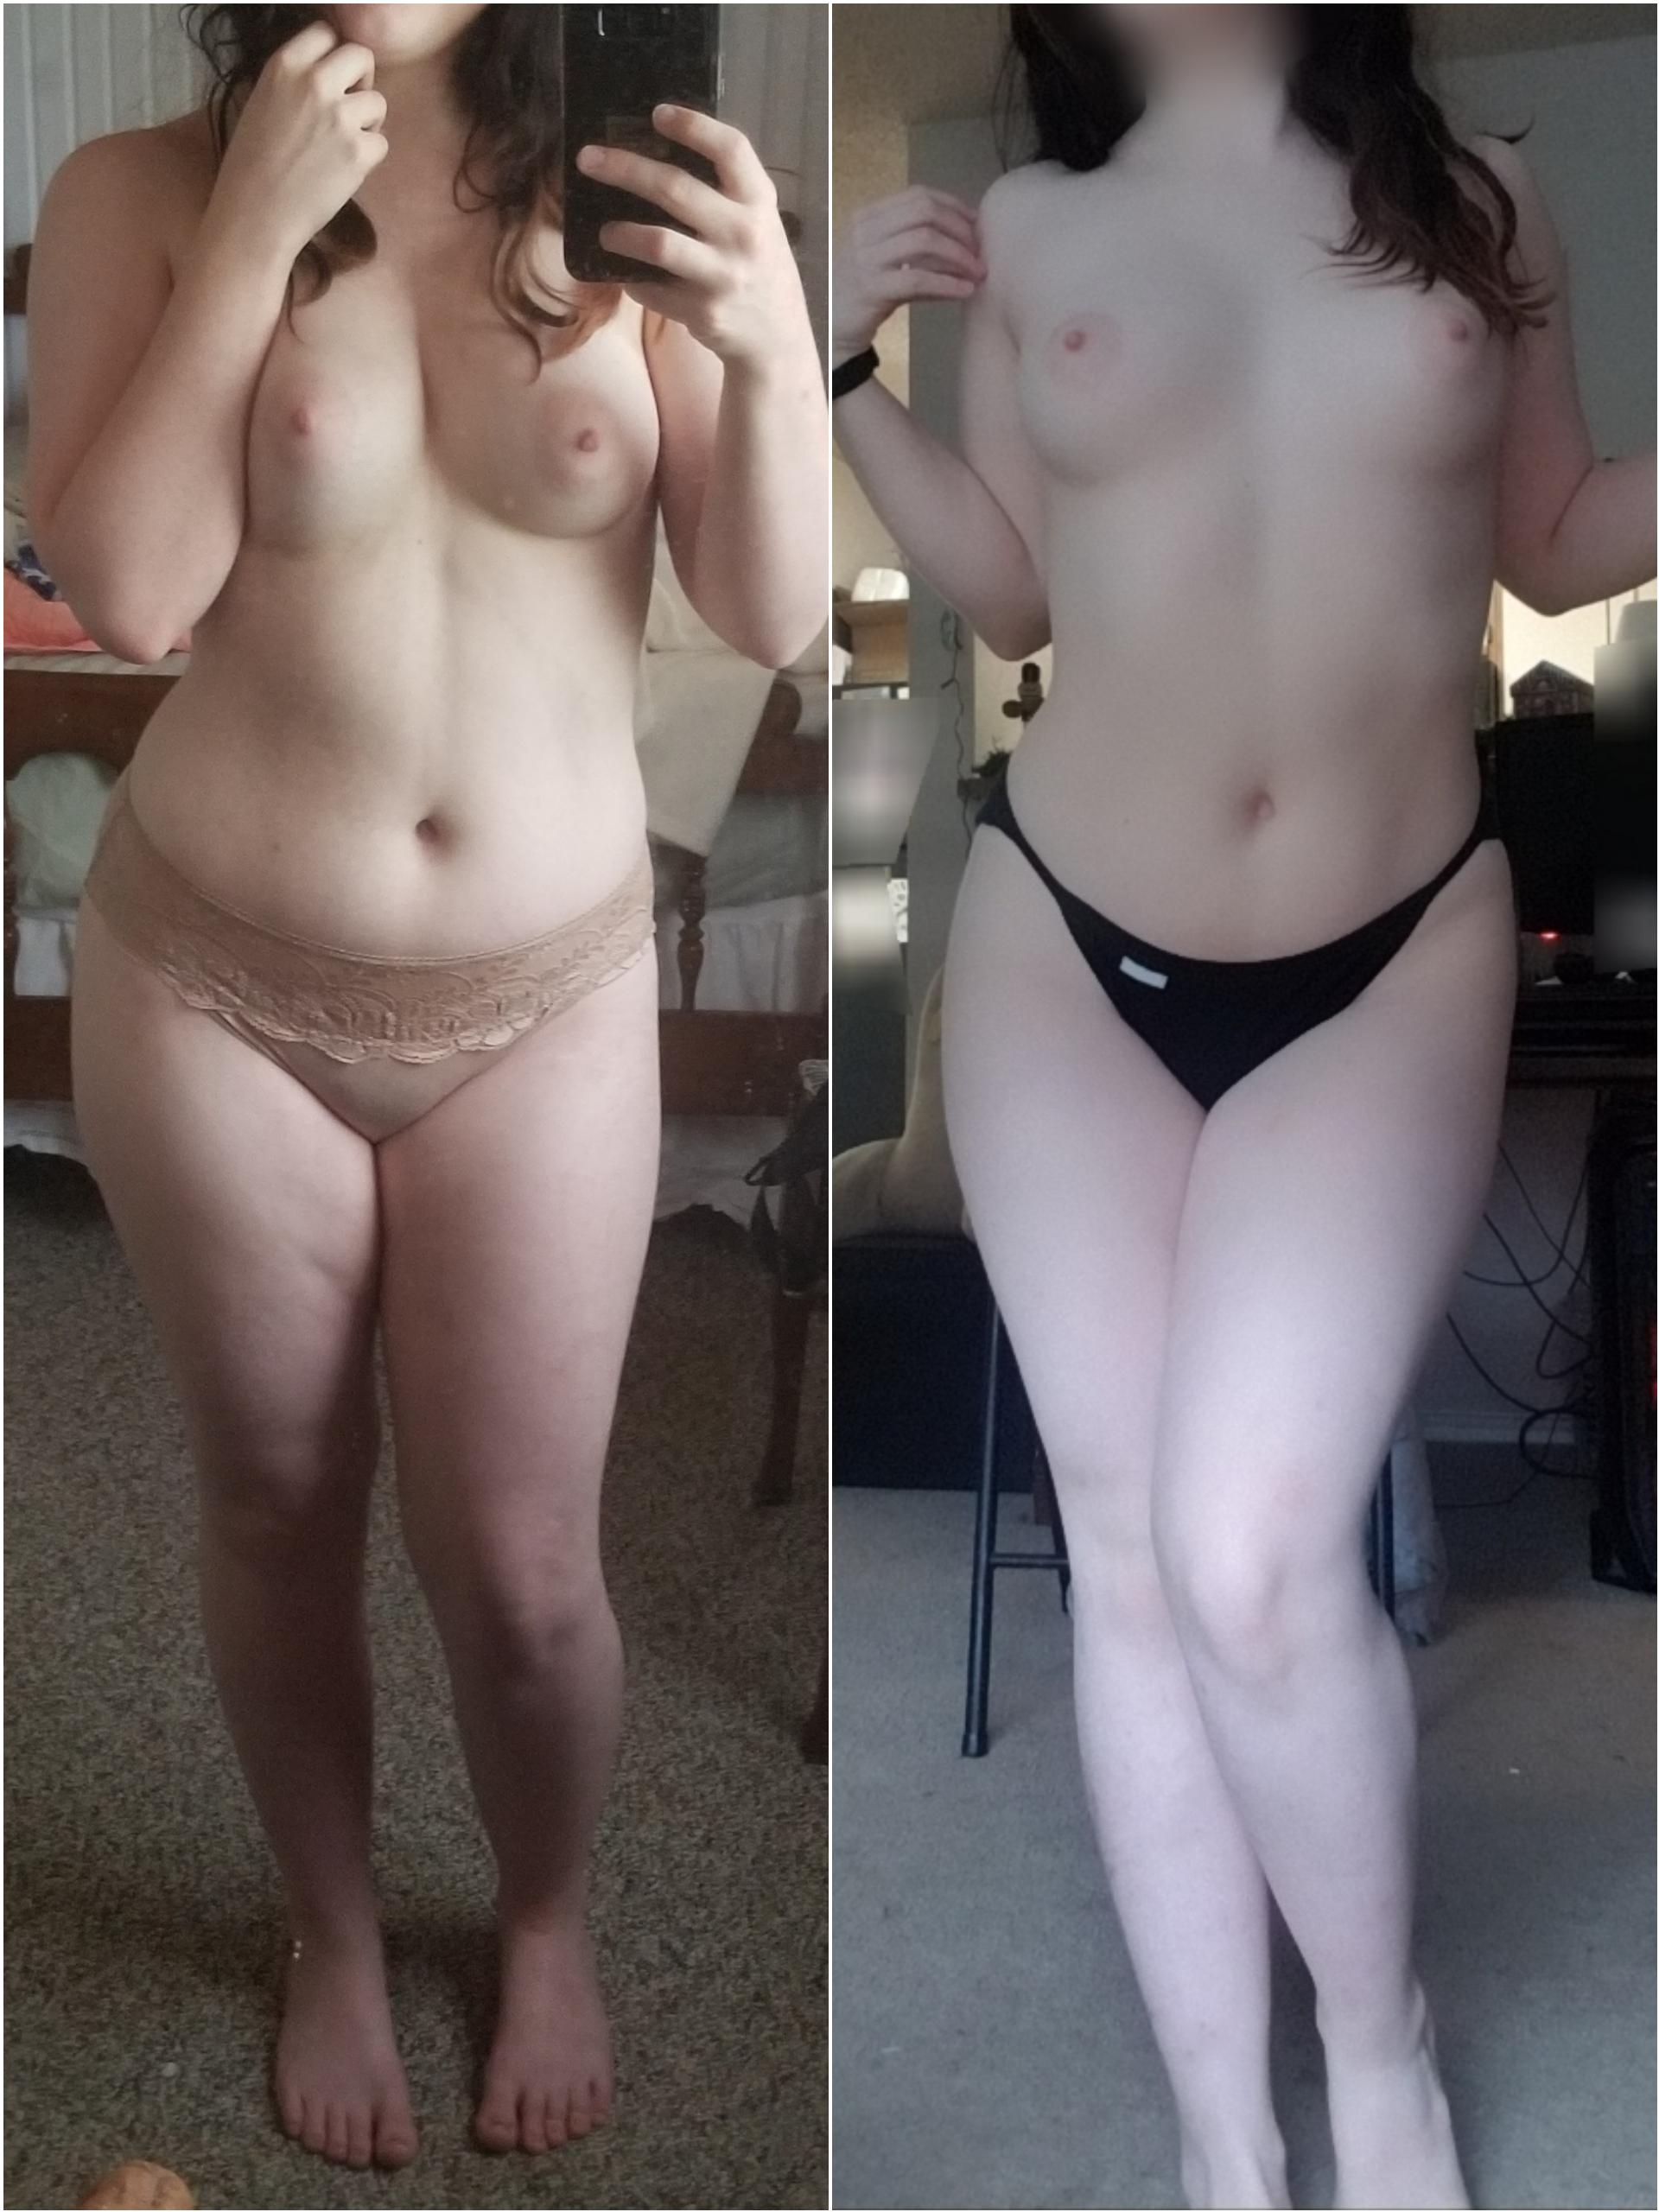 A before and after picture of my weight loss! Finally reached my goal weight (f)